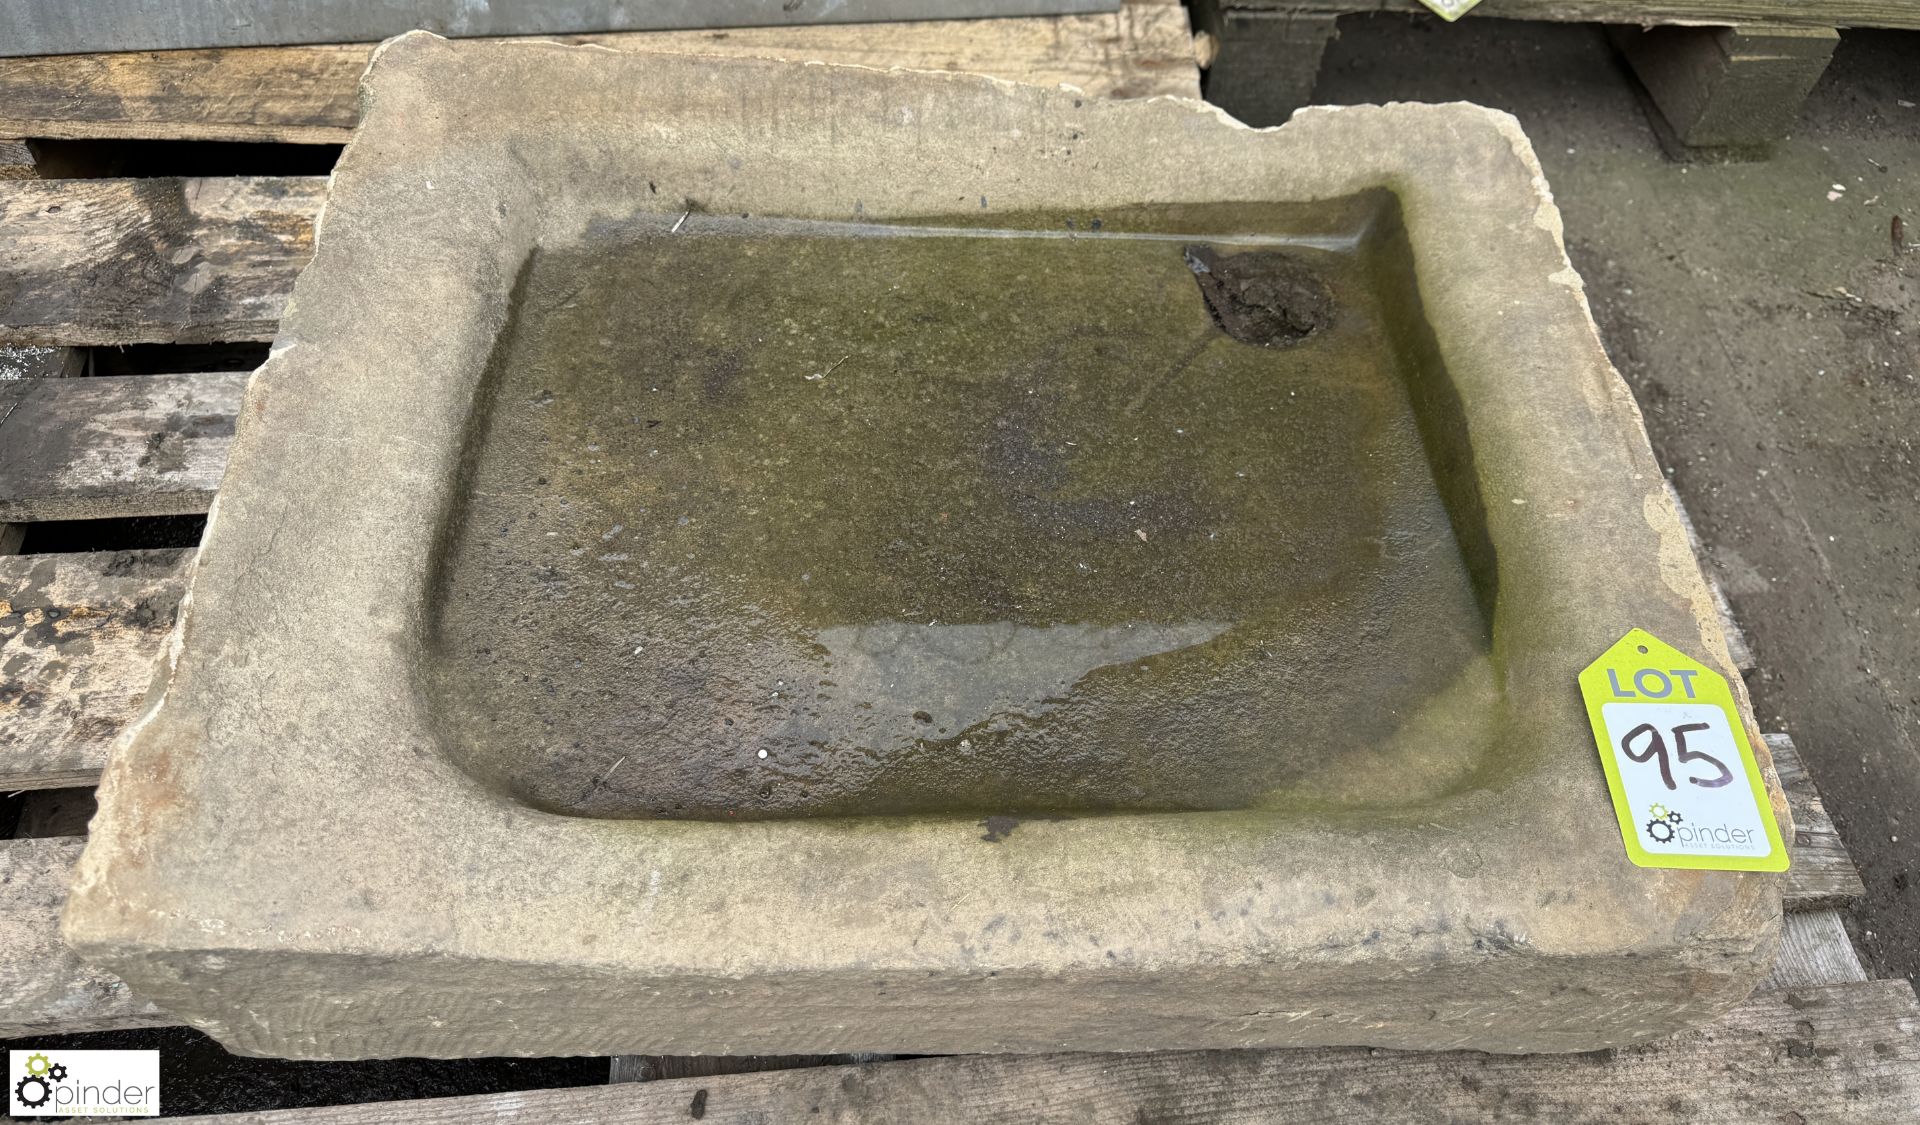 Yorkshire stone Sink, 700mm x 530mm x 140mm - Image 2 of 4